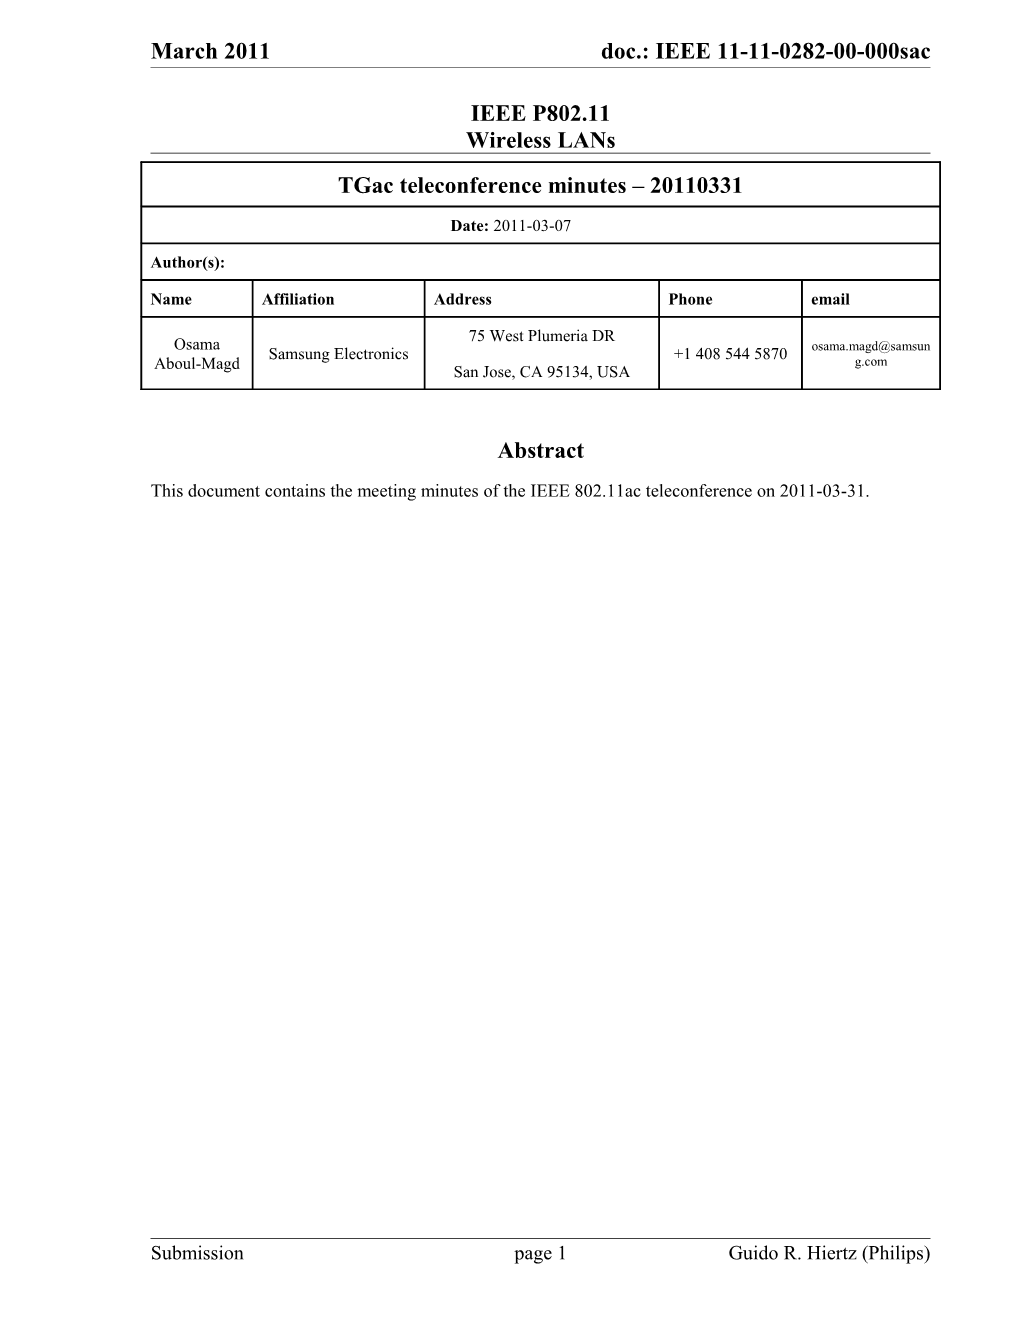 This Document Contains the Meeting Minutes of the IEEE 802.11Ac Teleconference on 2011-03-31